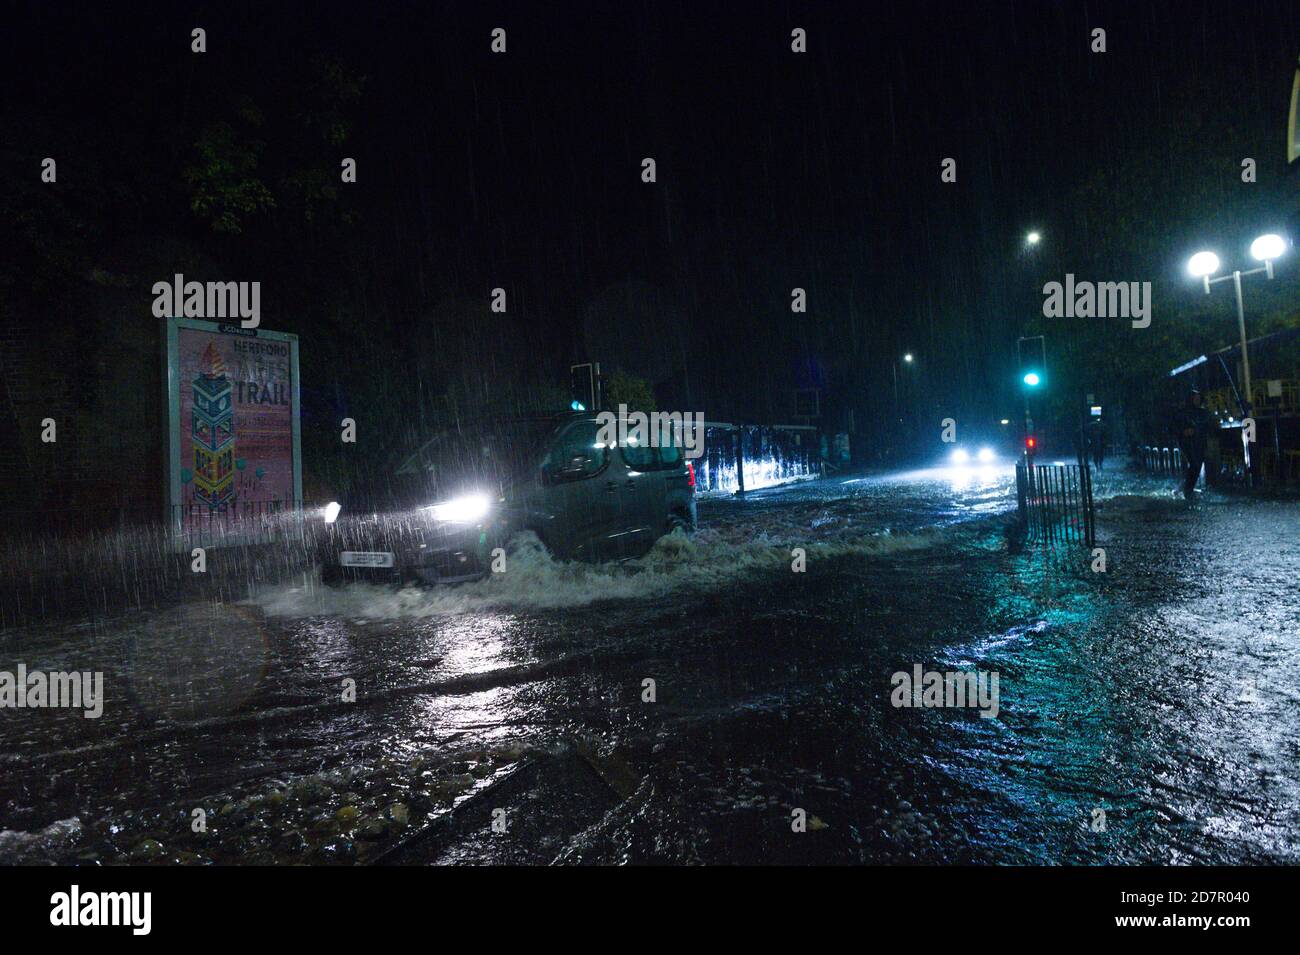 Hertford, UK. 24th June 2020. Heavy rainfall in Hertford, UK. The Met Office has issued a yellow warning for wind and rain in the south east. The rain has caused flooding in areas and was the water was as deep aws some cars bonnets outside of Hertford North railway station. Credit: Andrew Steven Graham/Alamy Live News Stock Photo